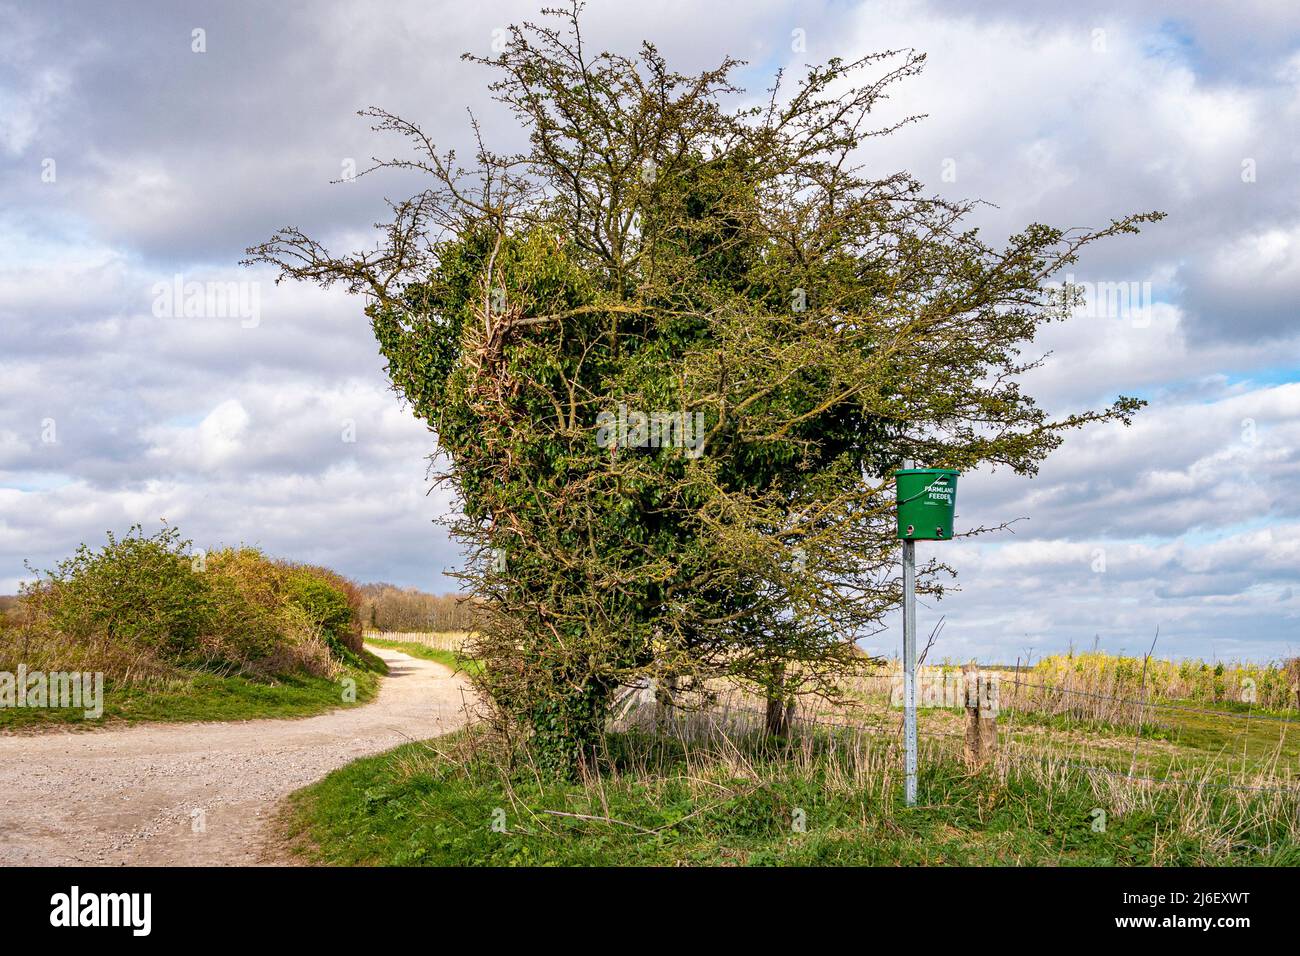 Pictured in the South Downs National Park, a bird feeder is in place to feed the smaller farmland birds - West Sussex, southern England, UK. Stock Photo